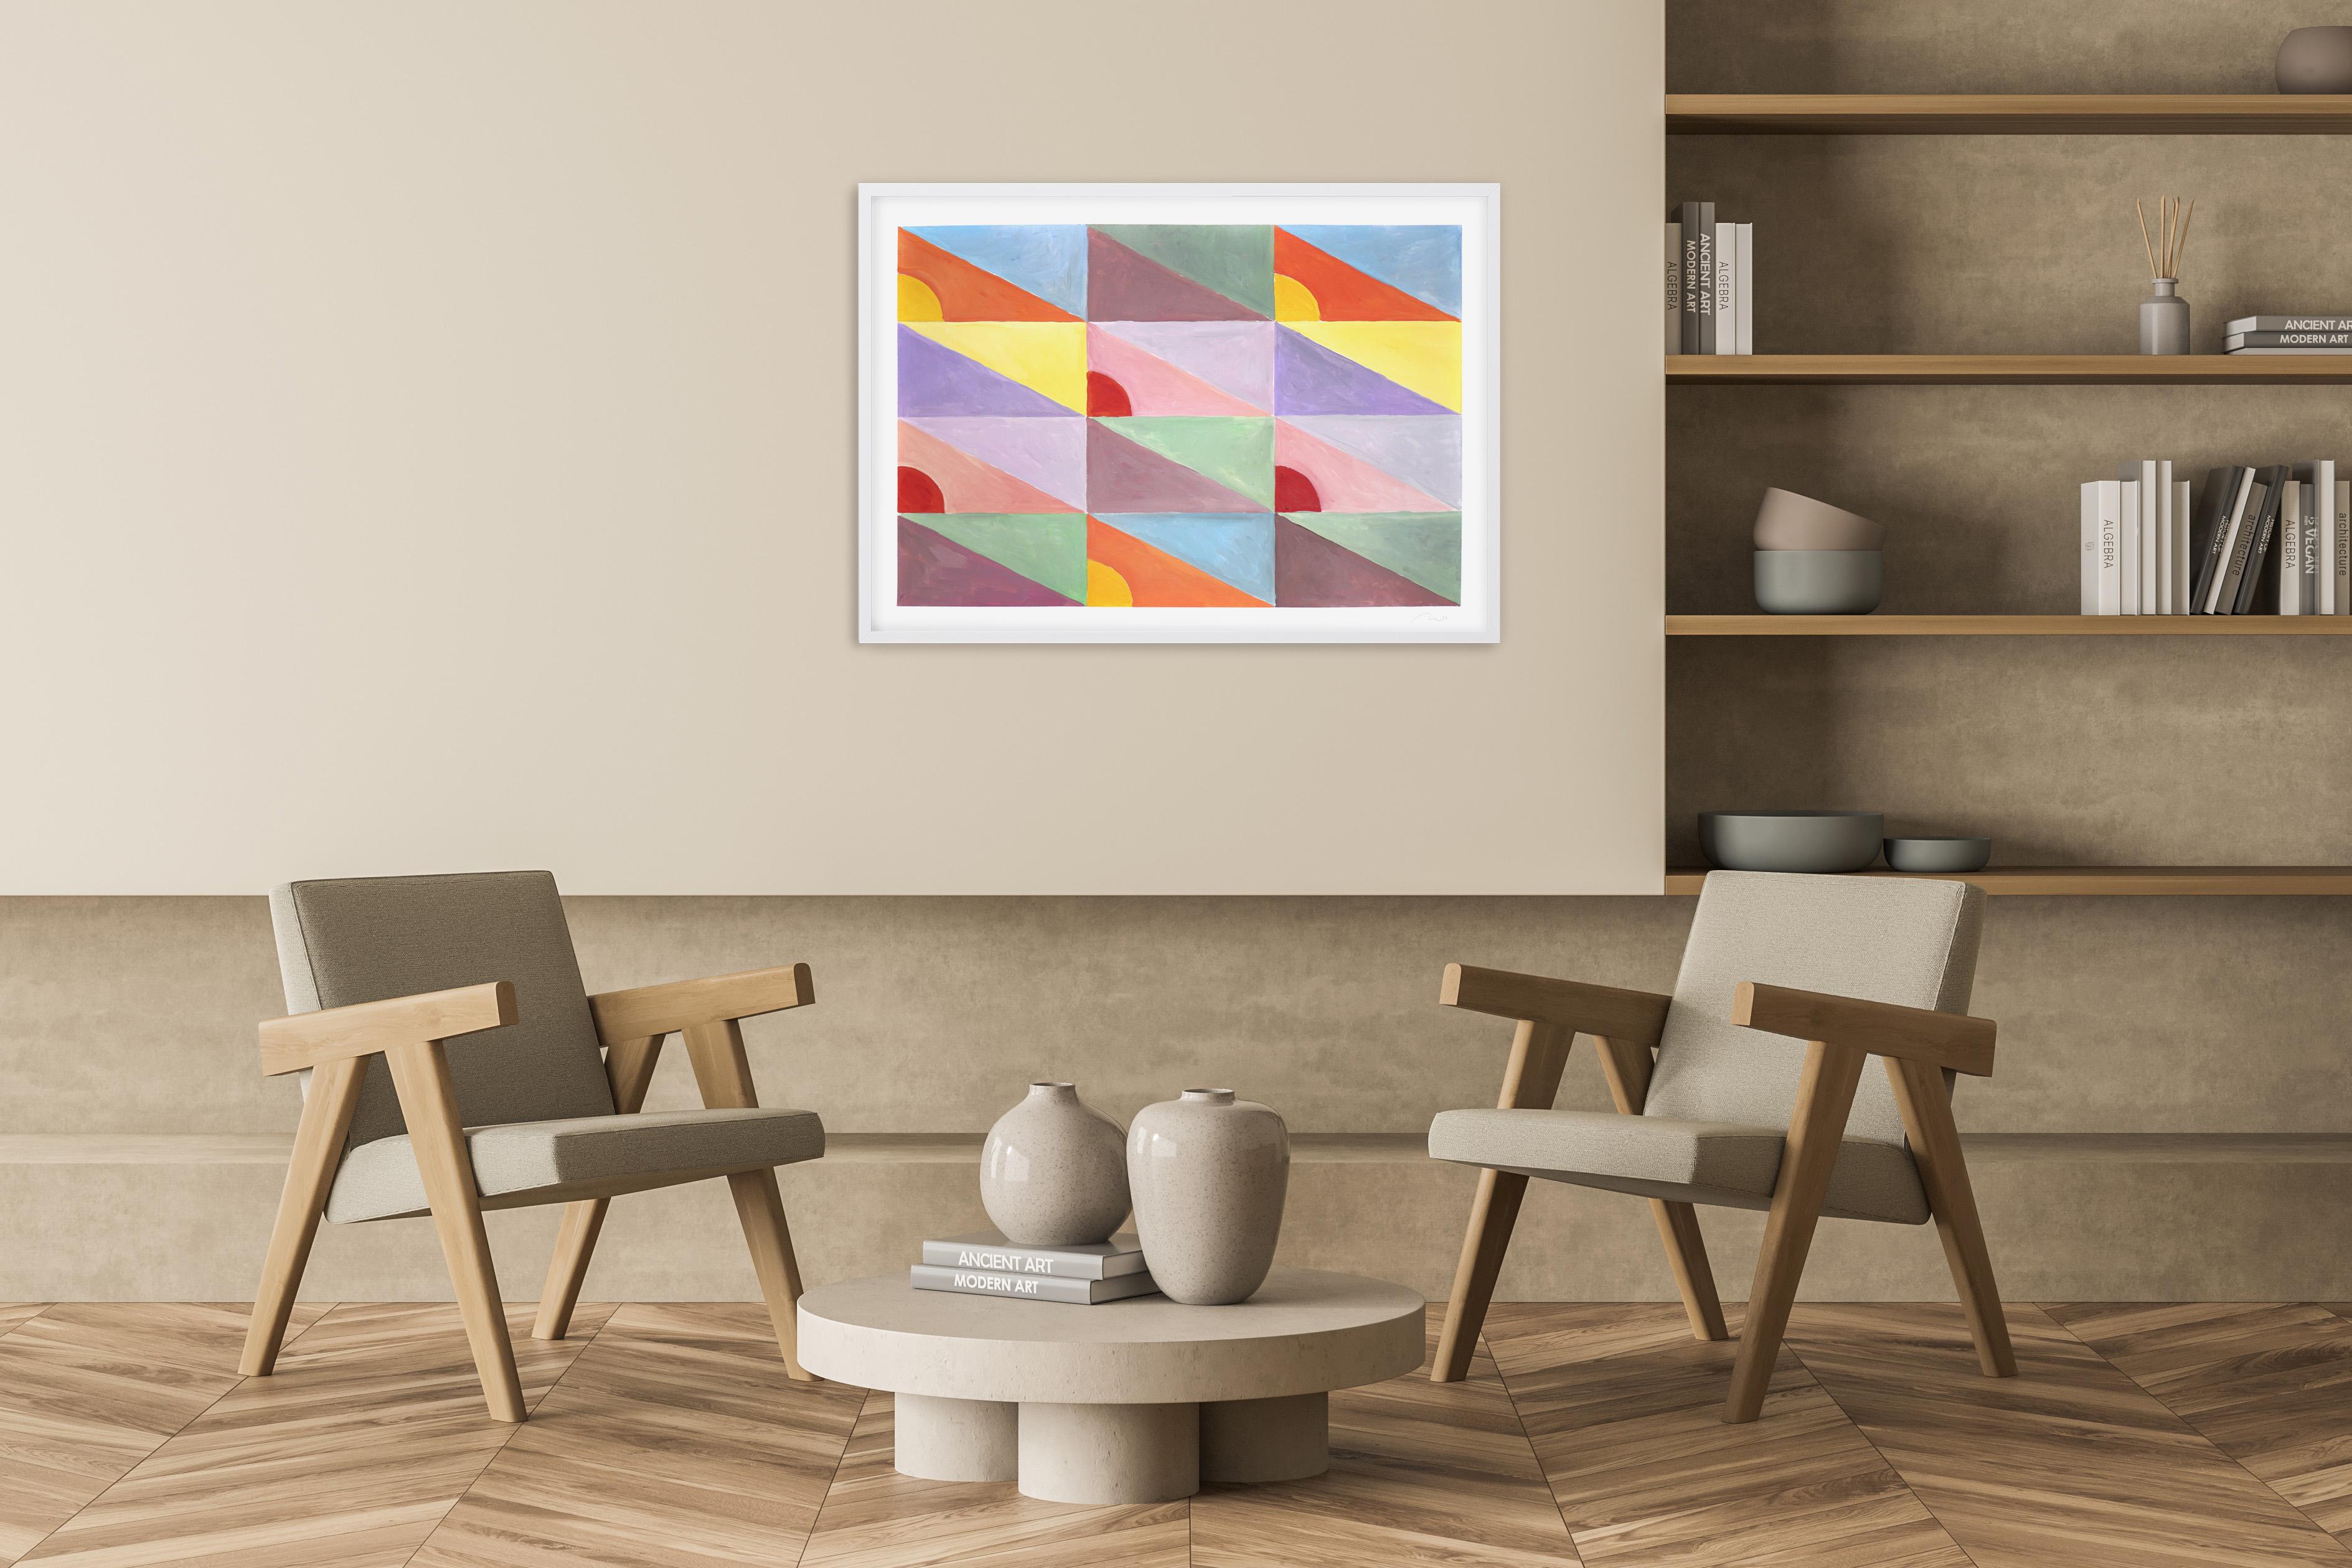 Pastel Diagonal Tiled Floor, Abstract Sun Shapes, Pink, Yellow and Red Triangles - Abstract Geometric Painting by Natalia Roman